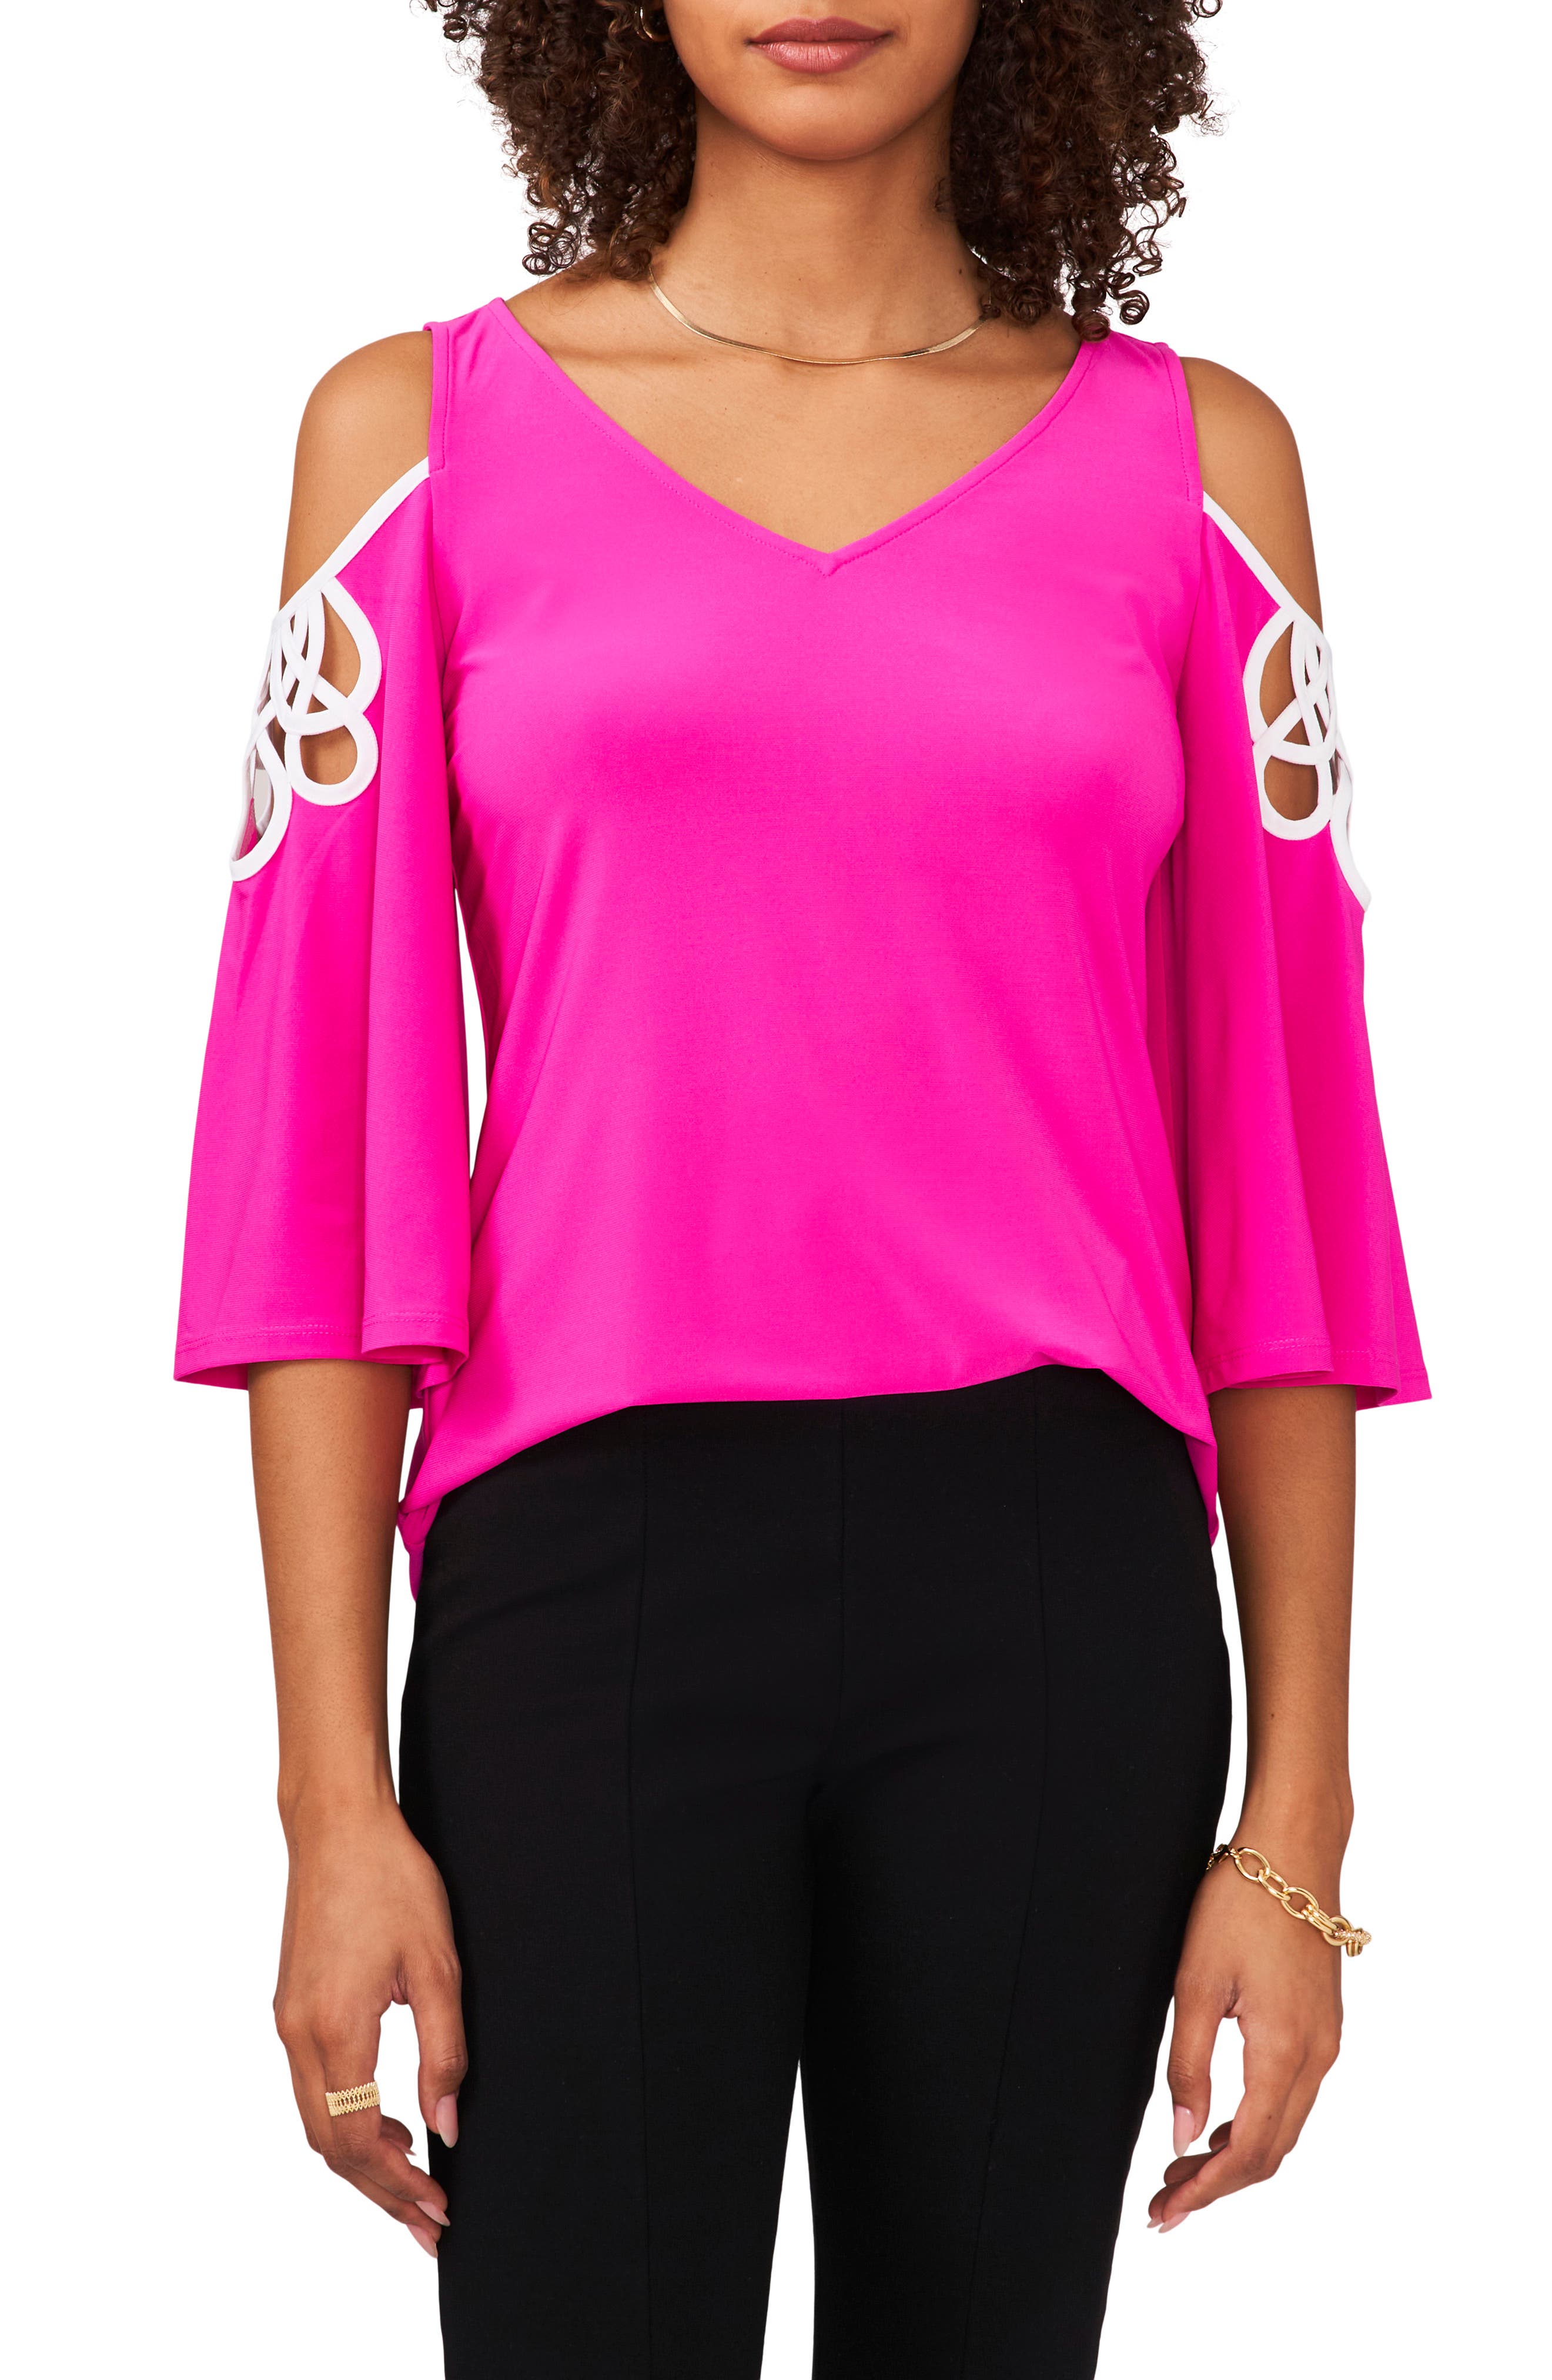 Chaus Womens S/S Side Knot Top